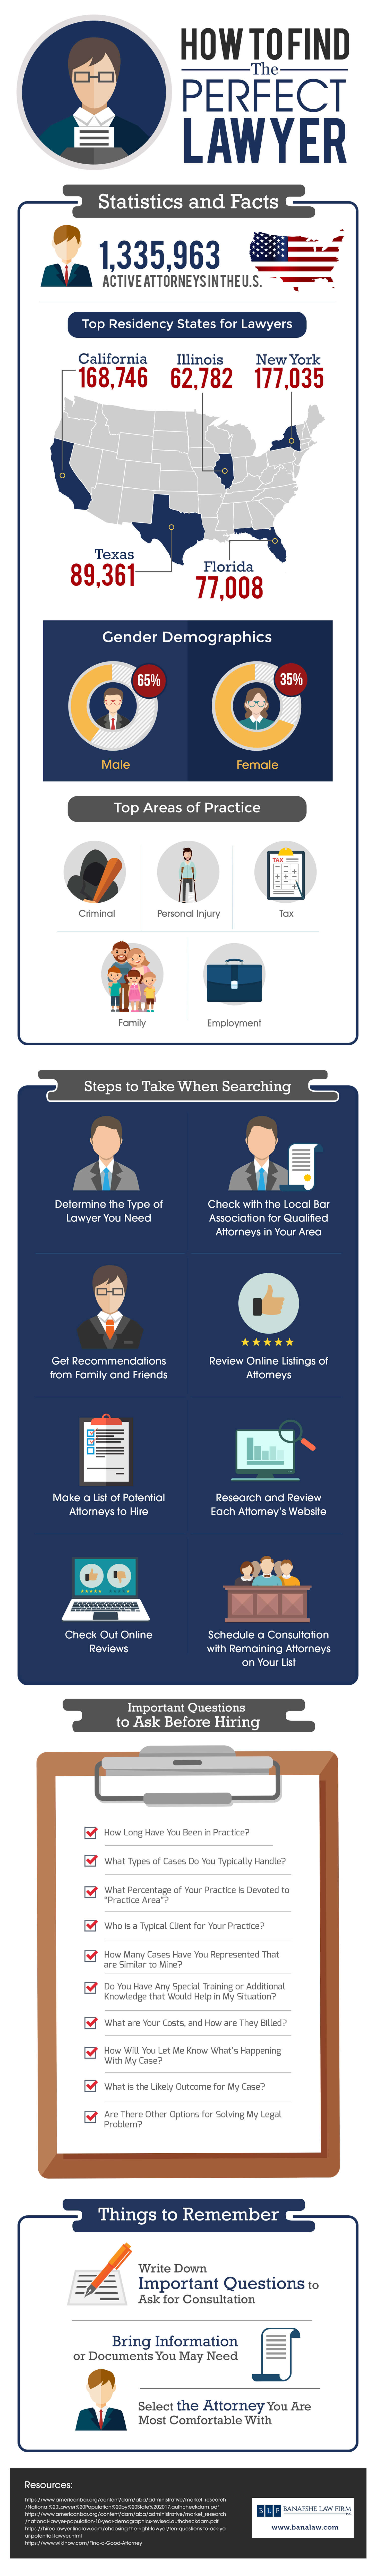 Finding a potential lawyer guide